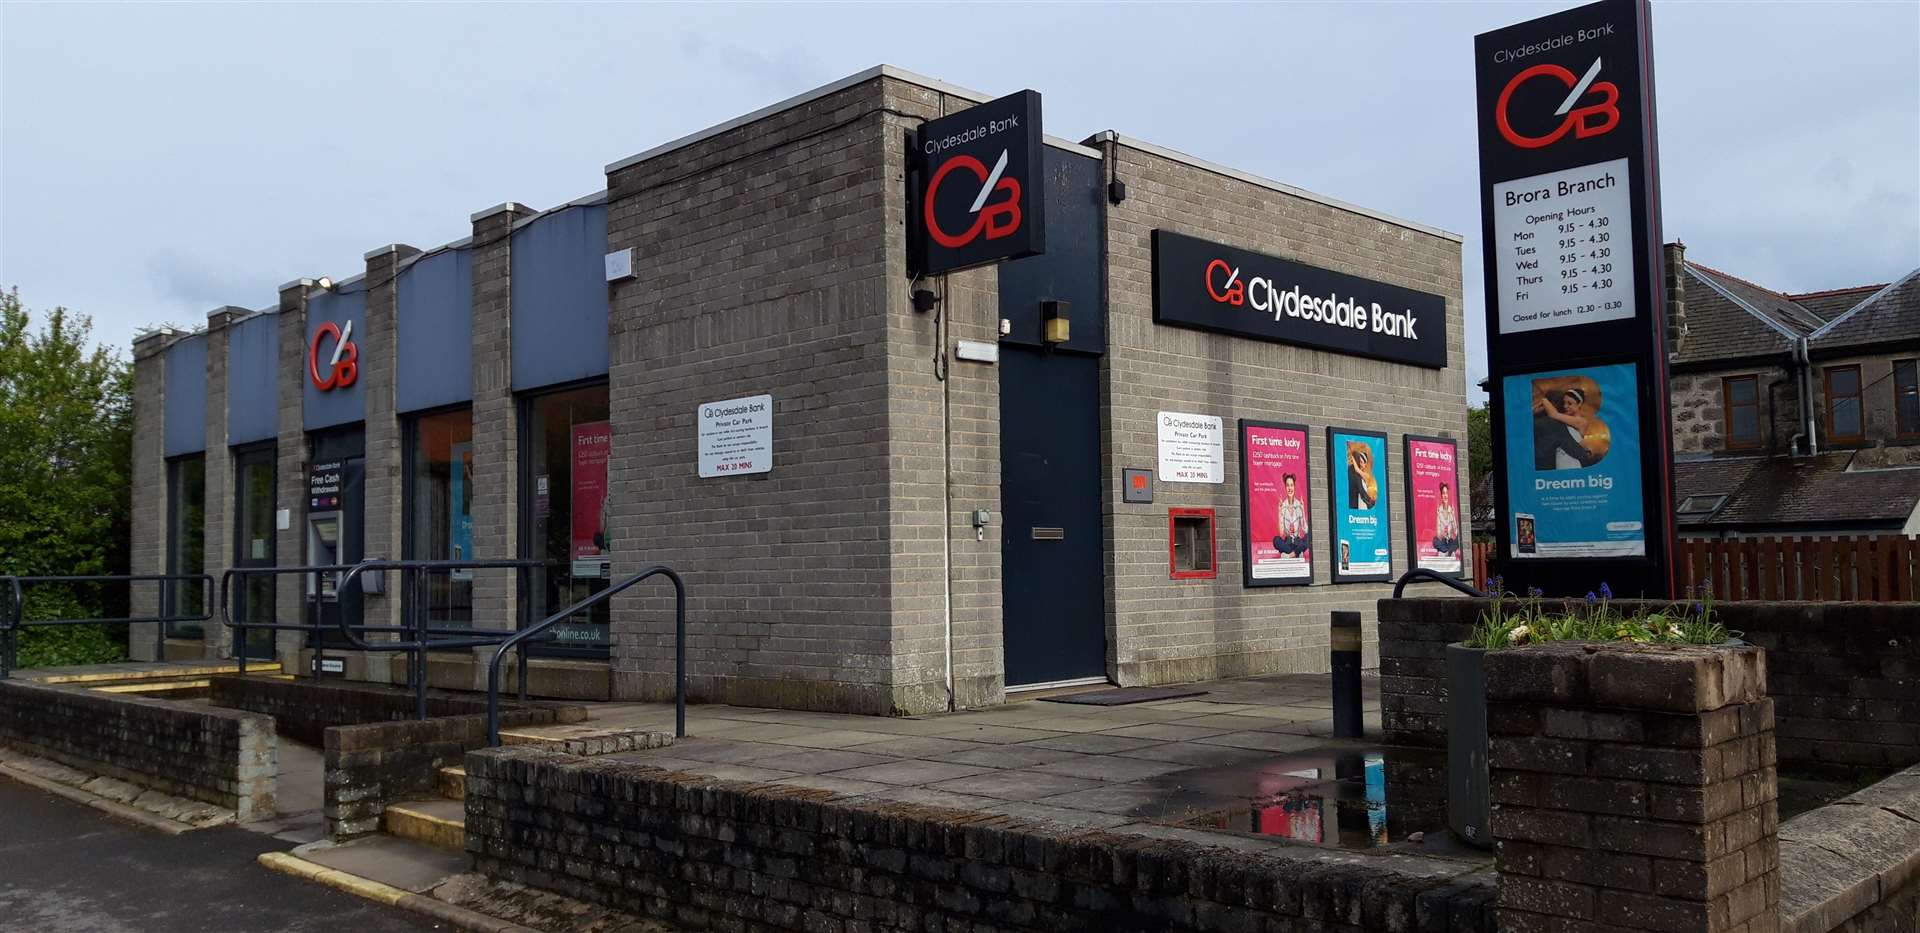 Clydesdale Bank announced yesterday they are to close their Brora branch later this year.